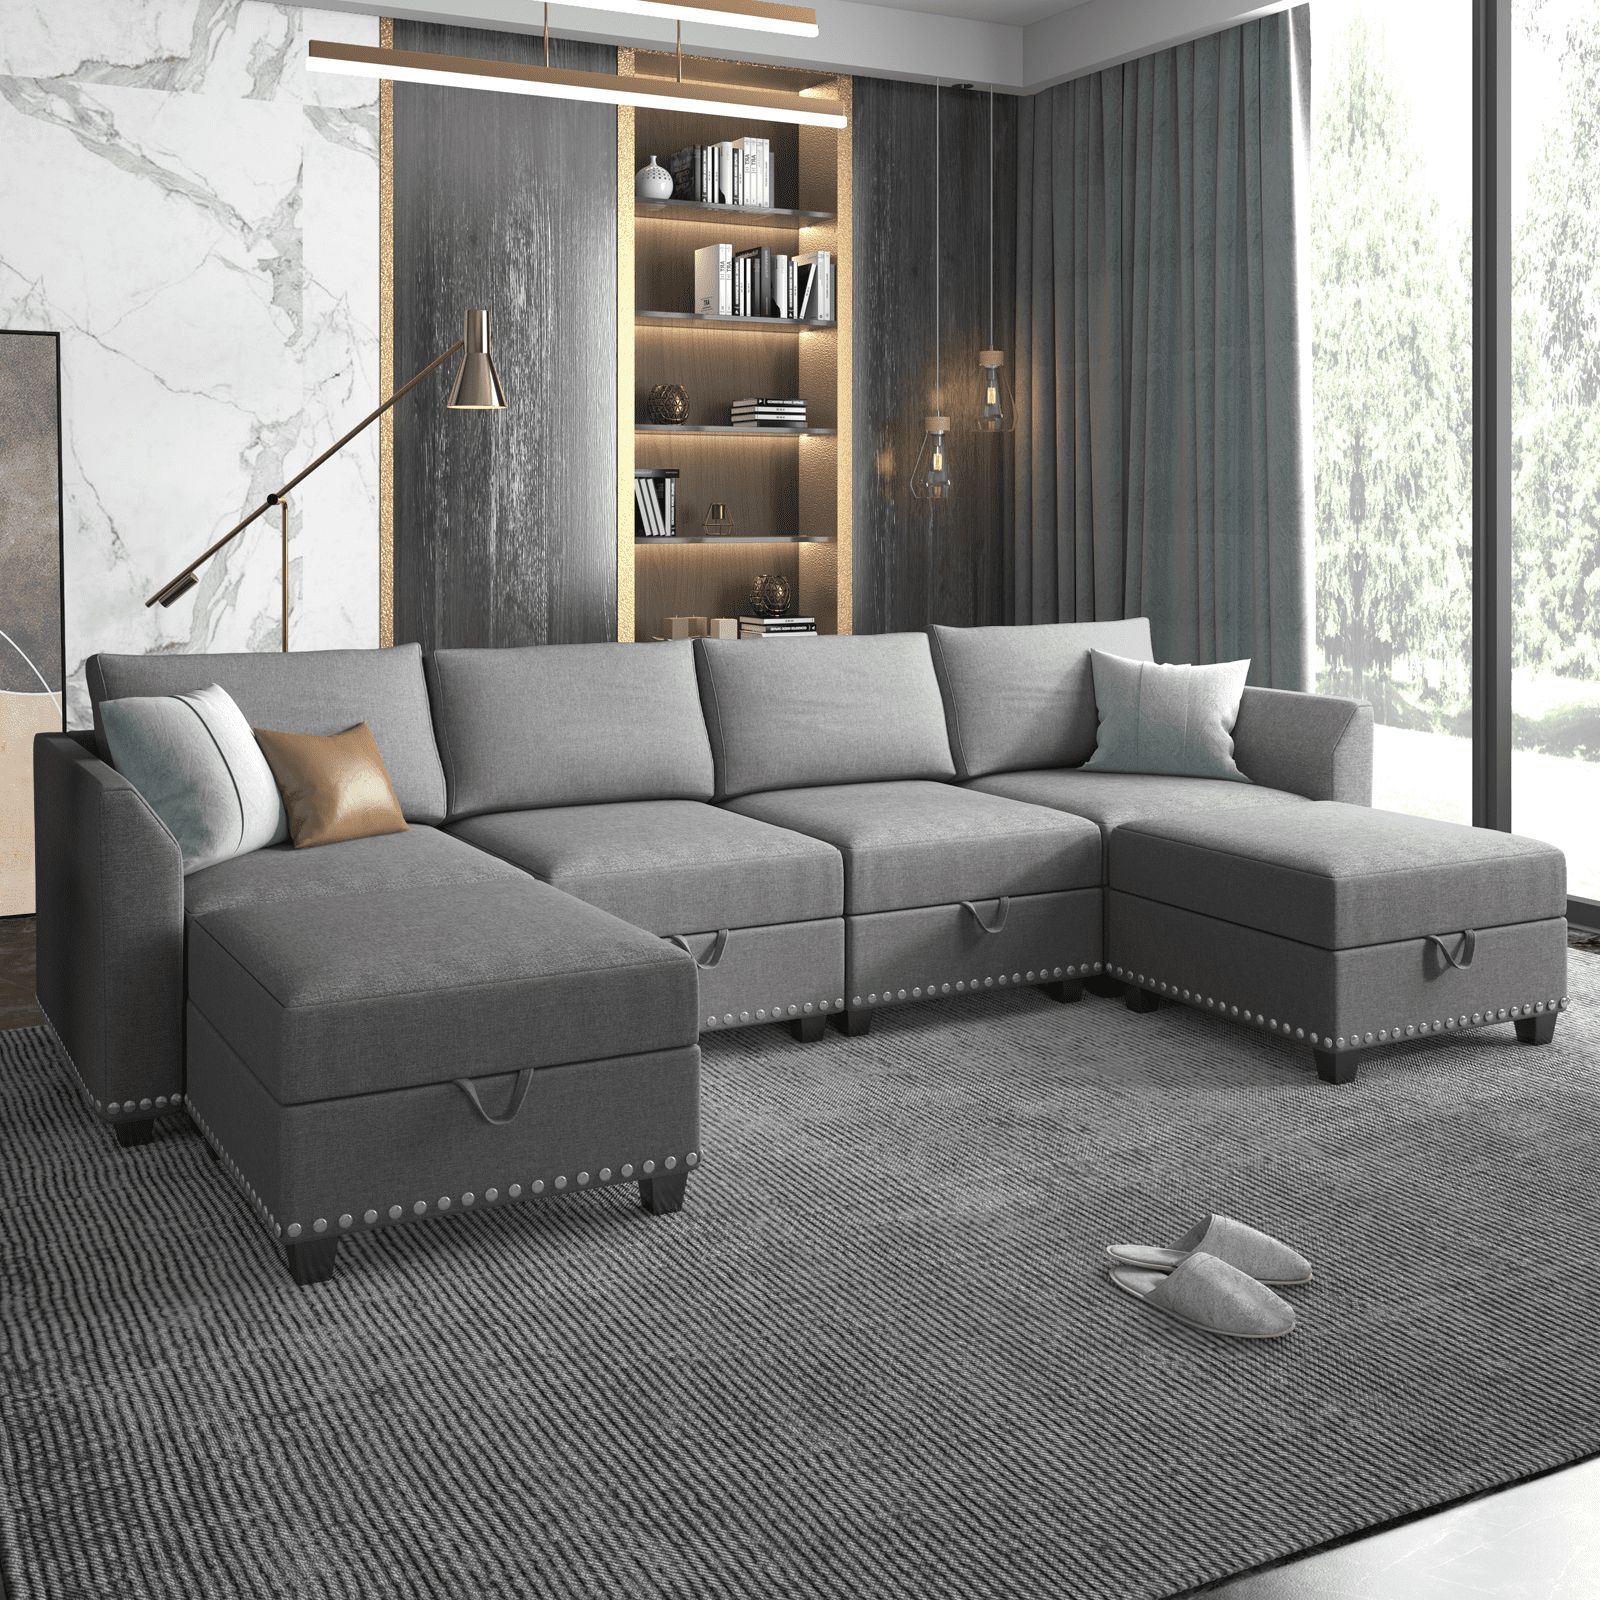 Mjkone U Shaped Sectional Sofa With Storage, 6 Seater Modular Sectional Sofa  With Nailhead Trim, Oversized Sleeper Sofa Couch Bed, Convertible Couches  For Living Room,Free Combination (Dark Grey） – Walmart Throughout 6 Seater Modular Sectional Sofas (Photo 1 of 15)